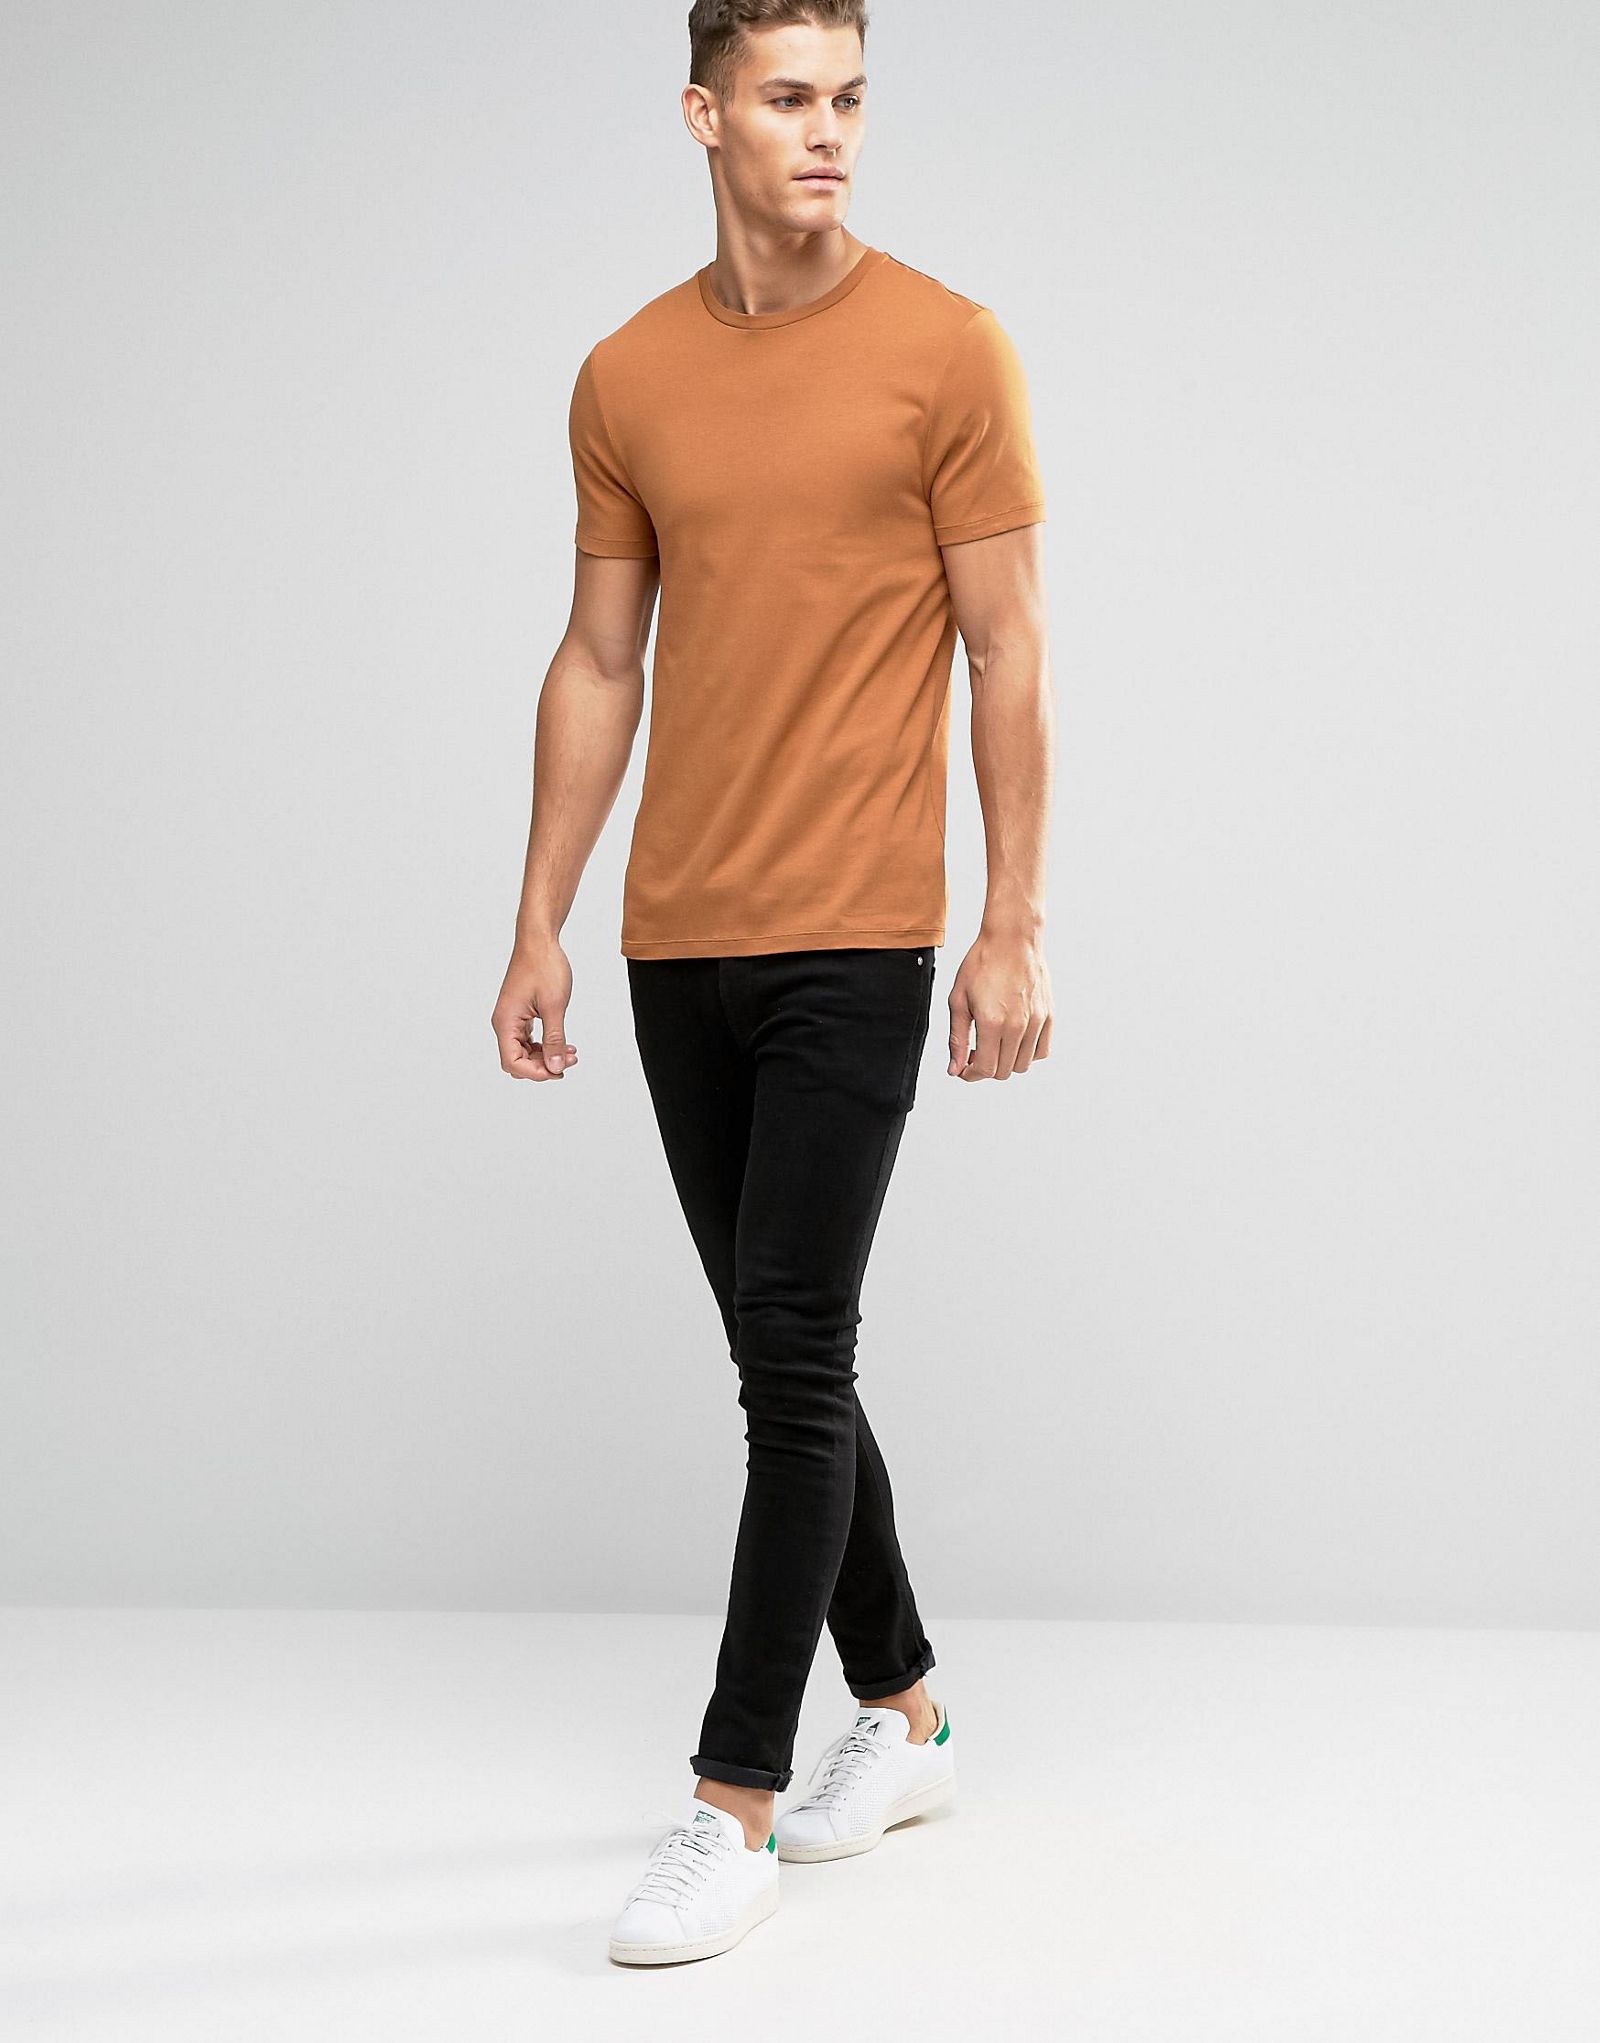 ASOS Muscle T-Shirt With Crew Neck In Tan